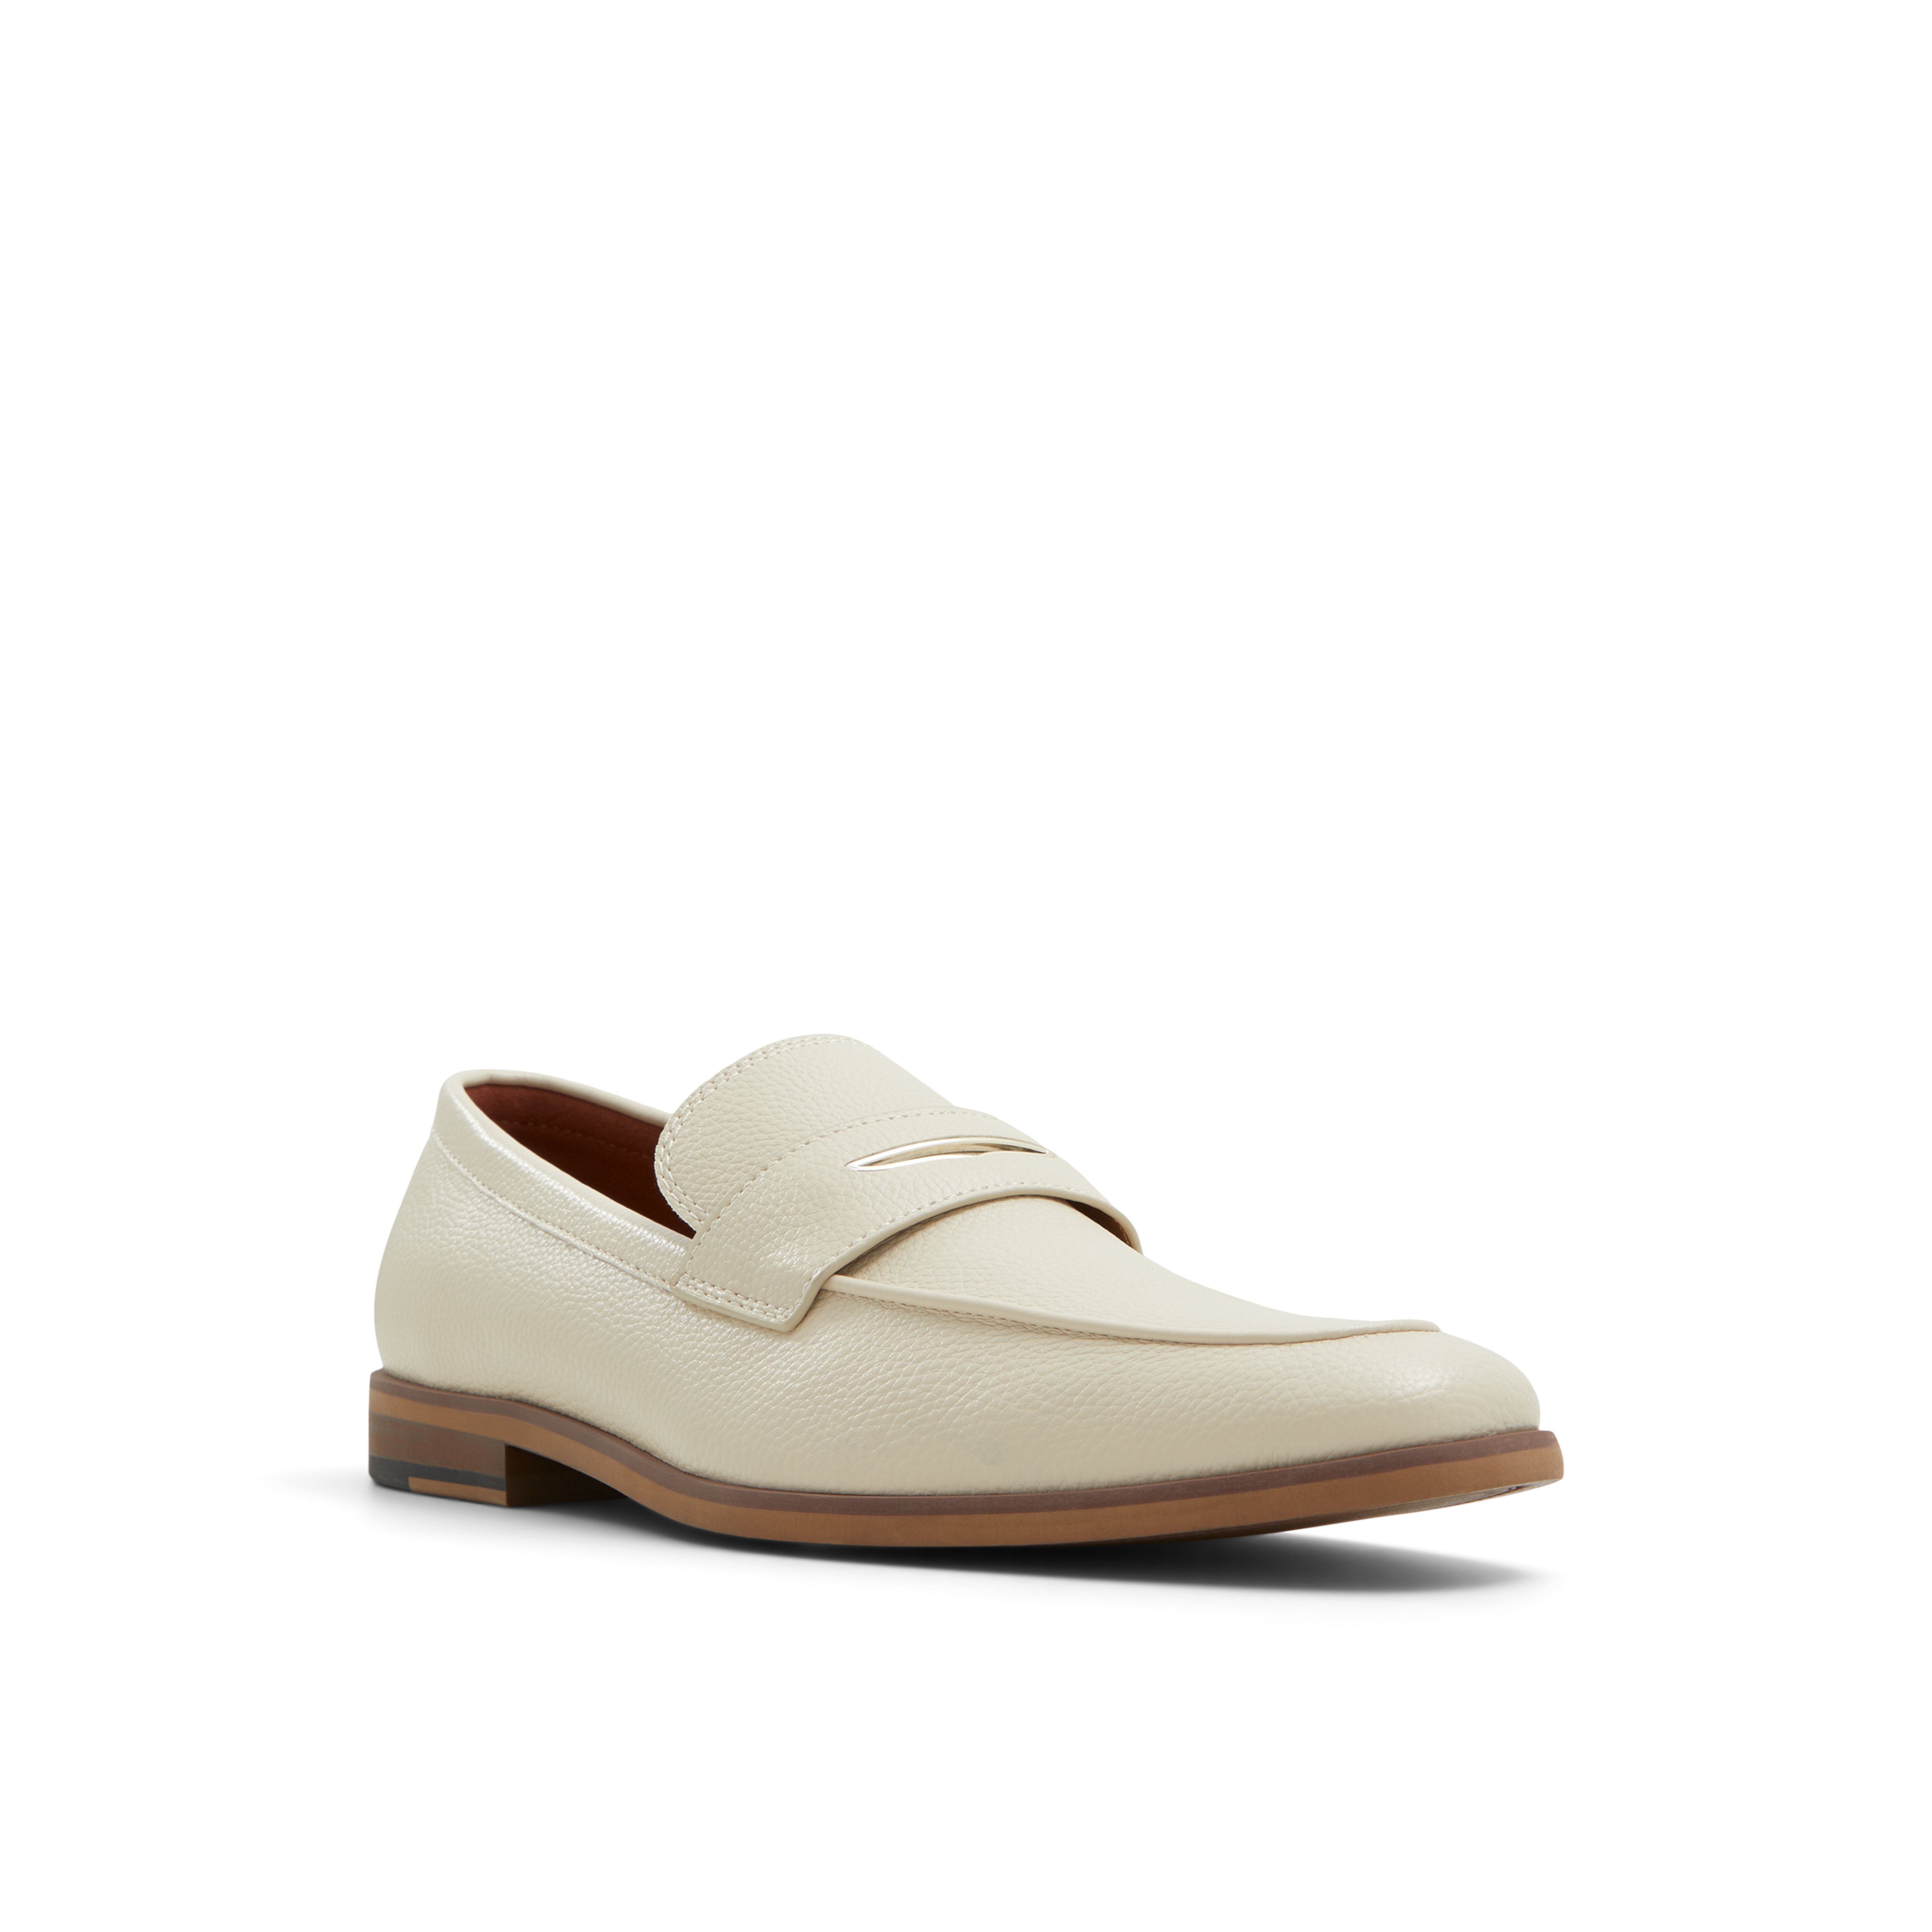 Astair Penny loafers